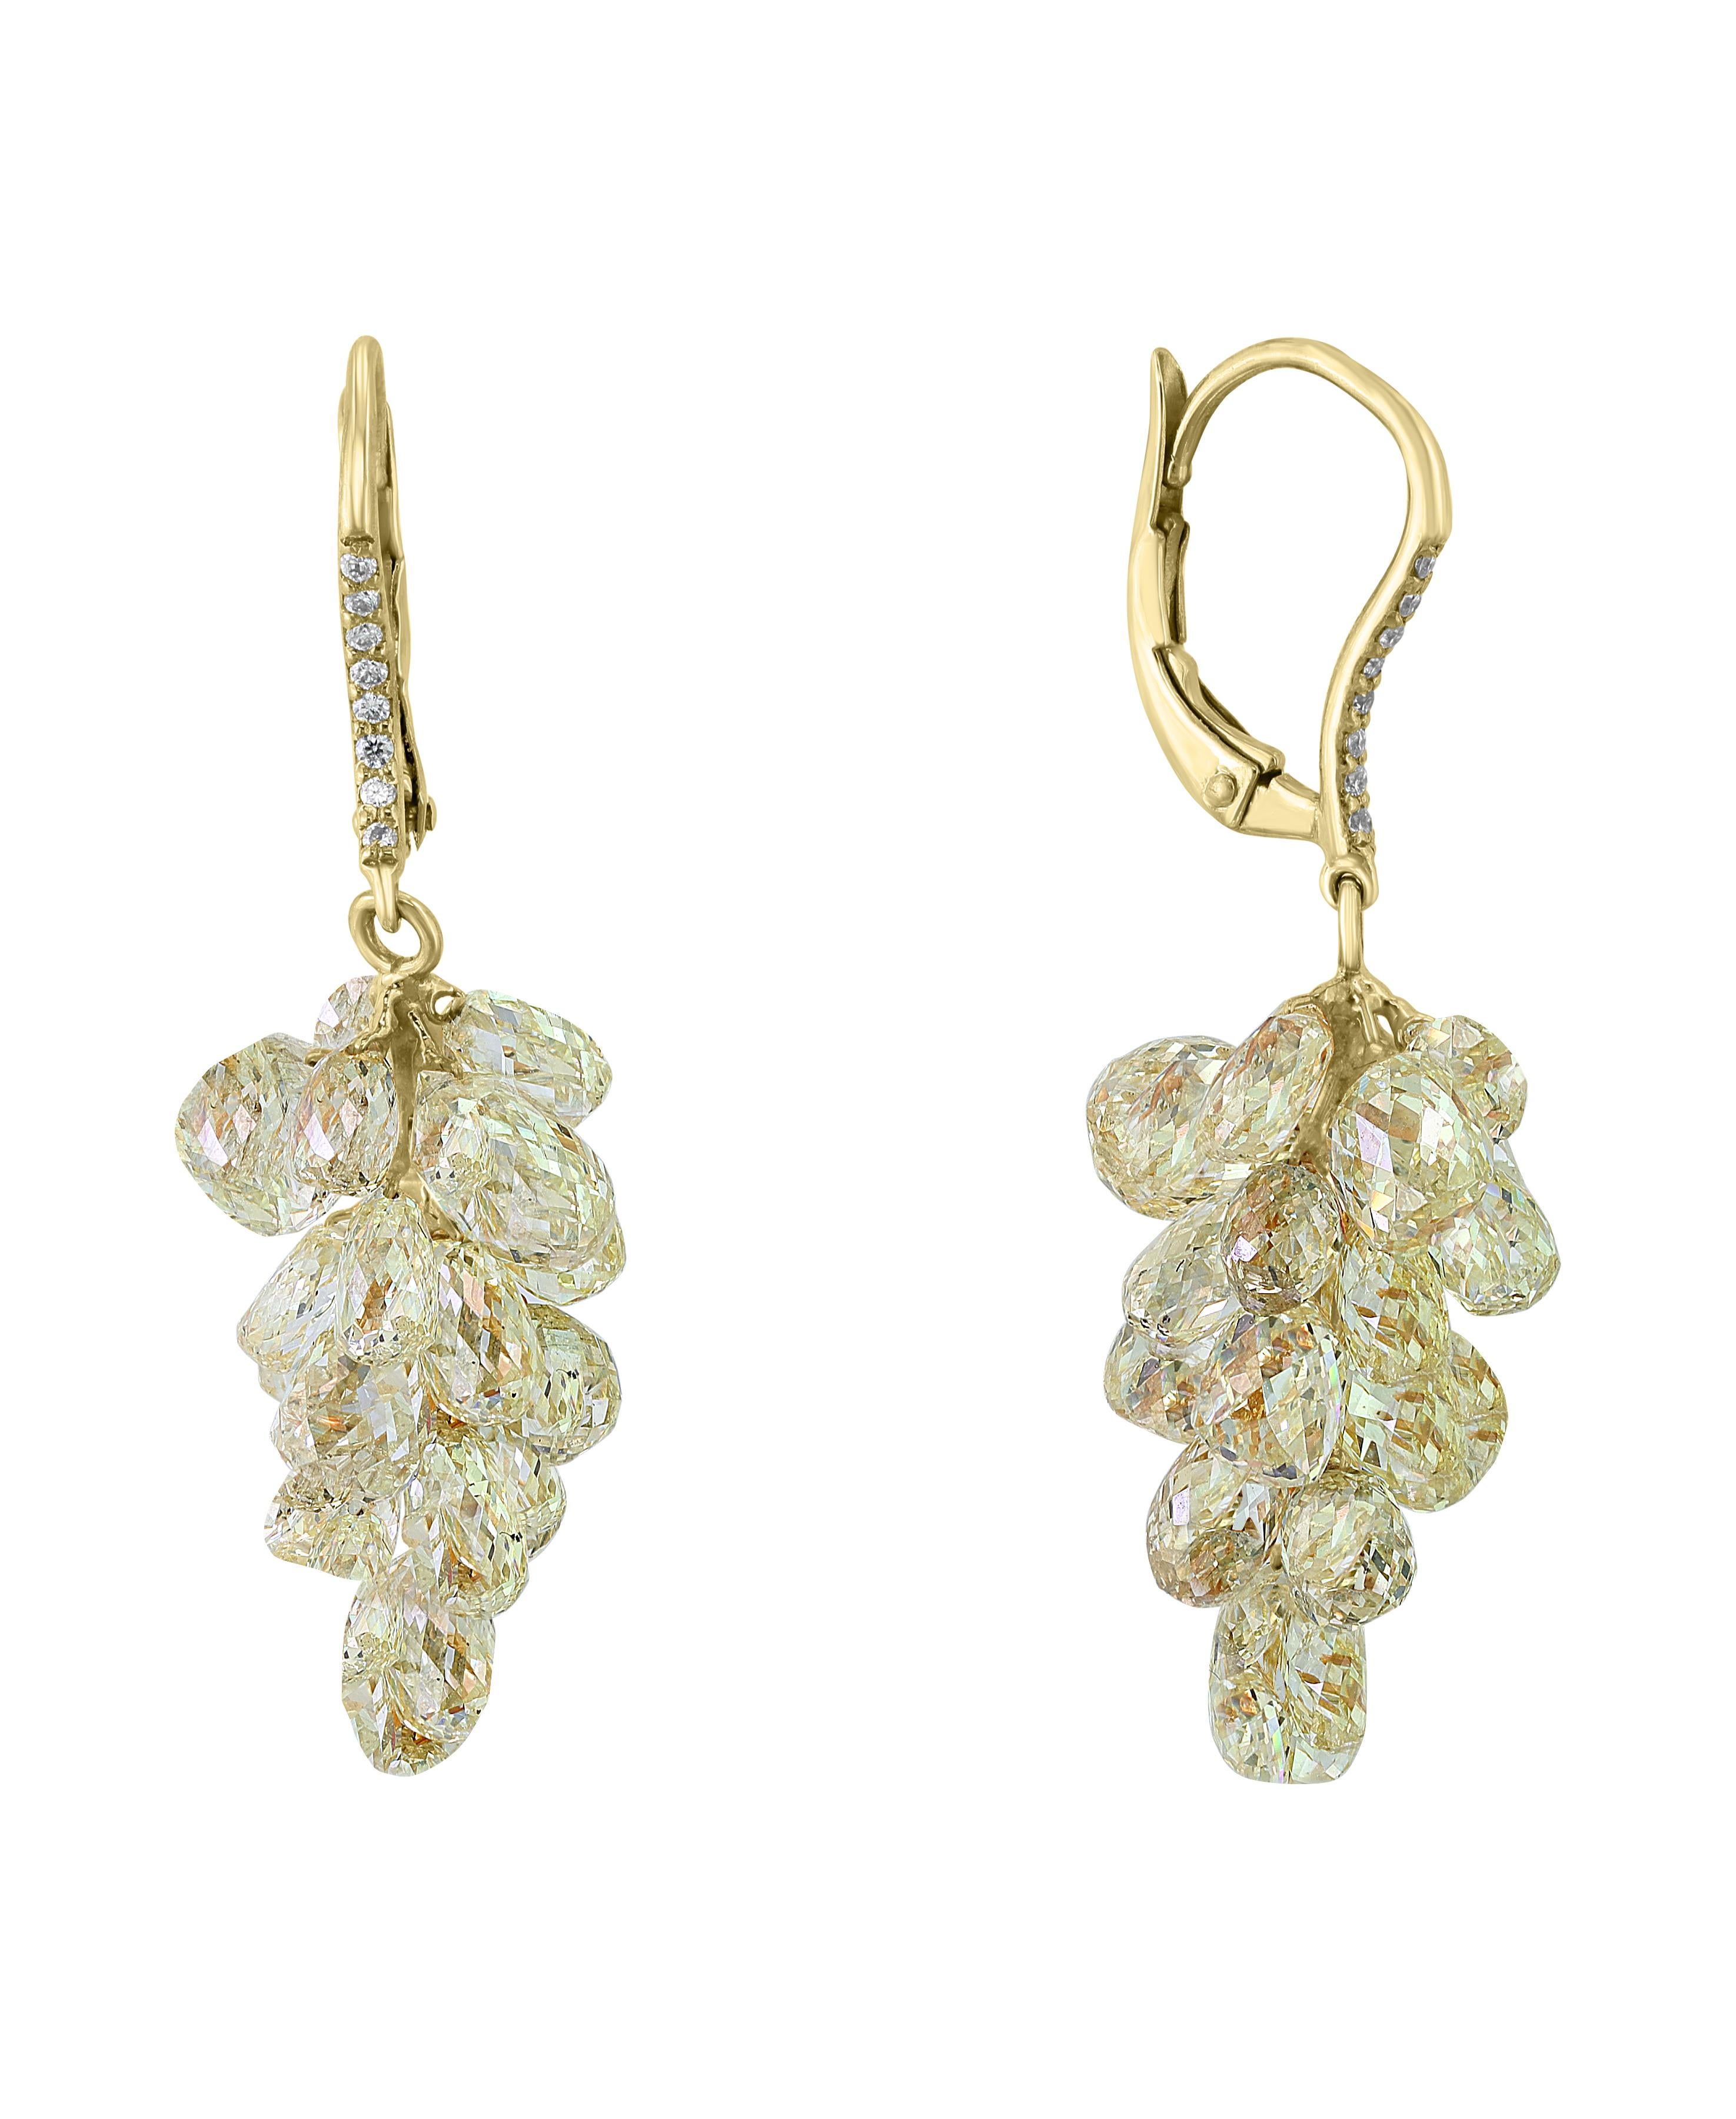 27 Carats Diamond Briolettes   Hanging Earrings  18 Karat Gold.
This exquisite pair of earrings are beautifully crafted with 18 karat yellow gold  weighing 
This pair of Earrings has multiple  fine   diamond briolettes weighing approximately 27